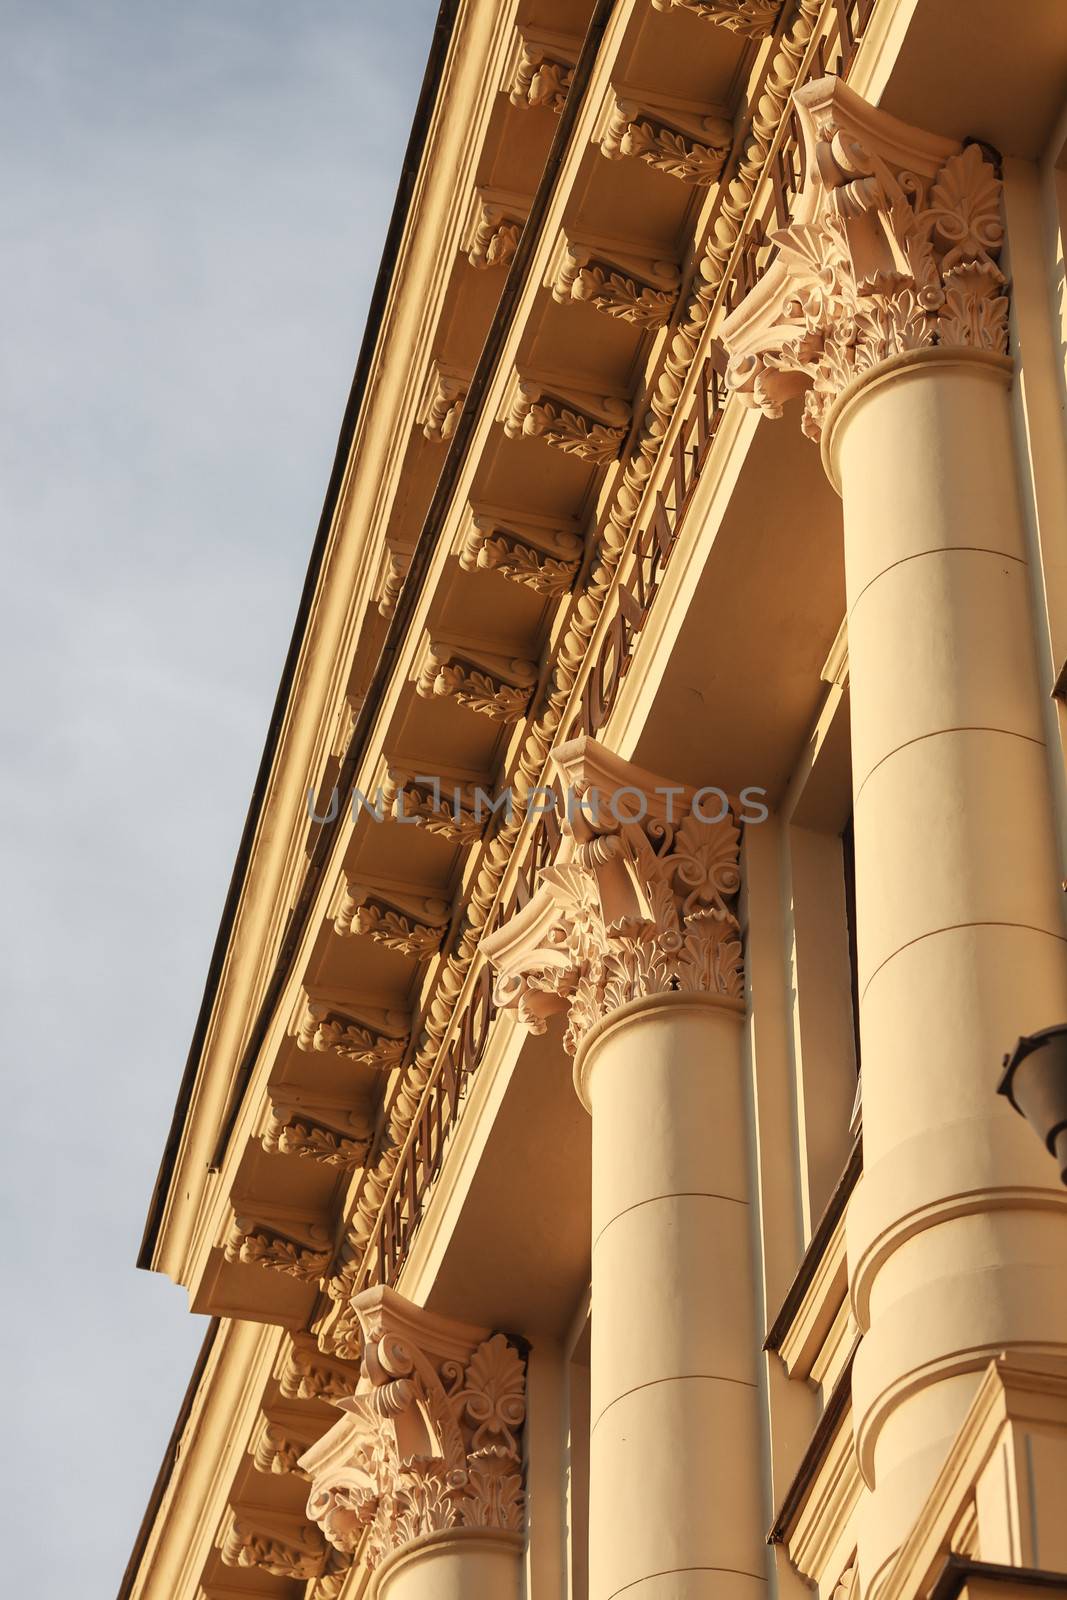 Fragment of classic or neoclassic building with columns and fine capitals, illuminated with warm summer sunlight, blue sky visible.